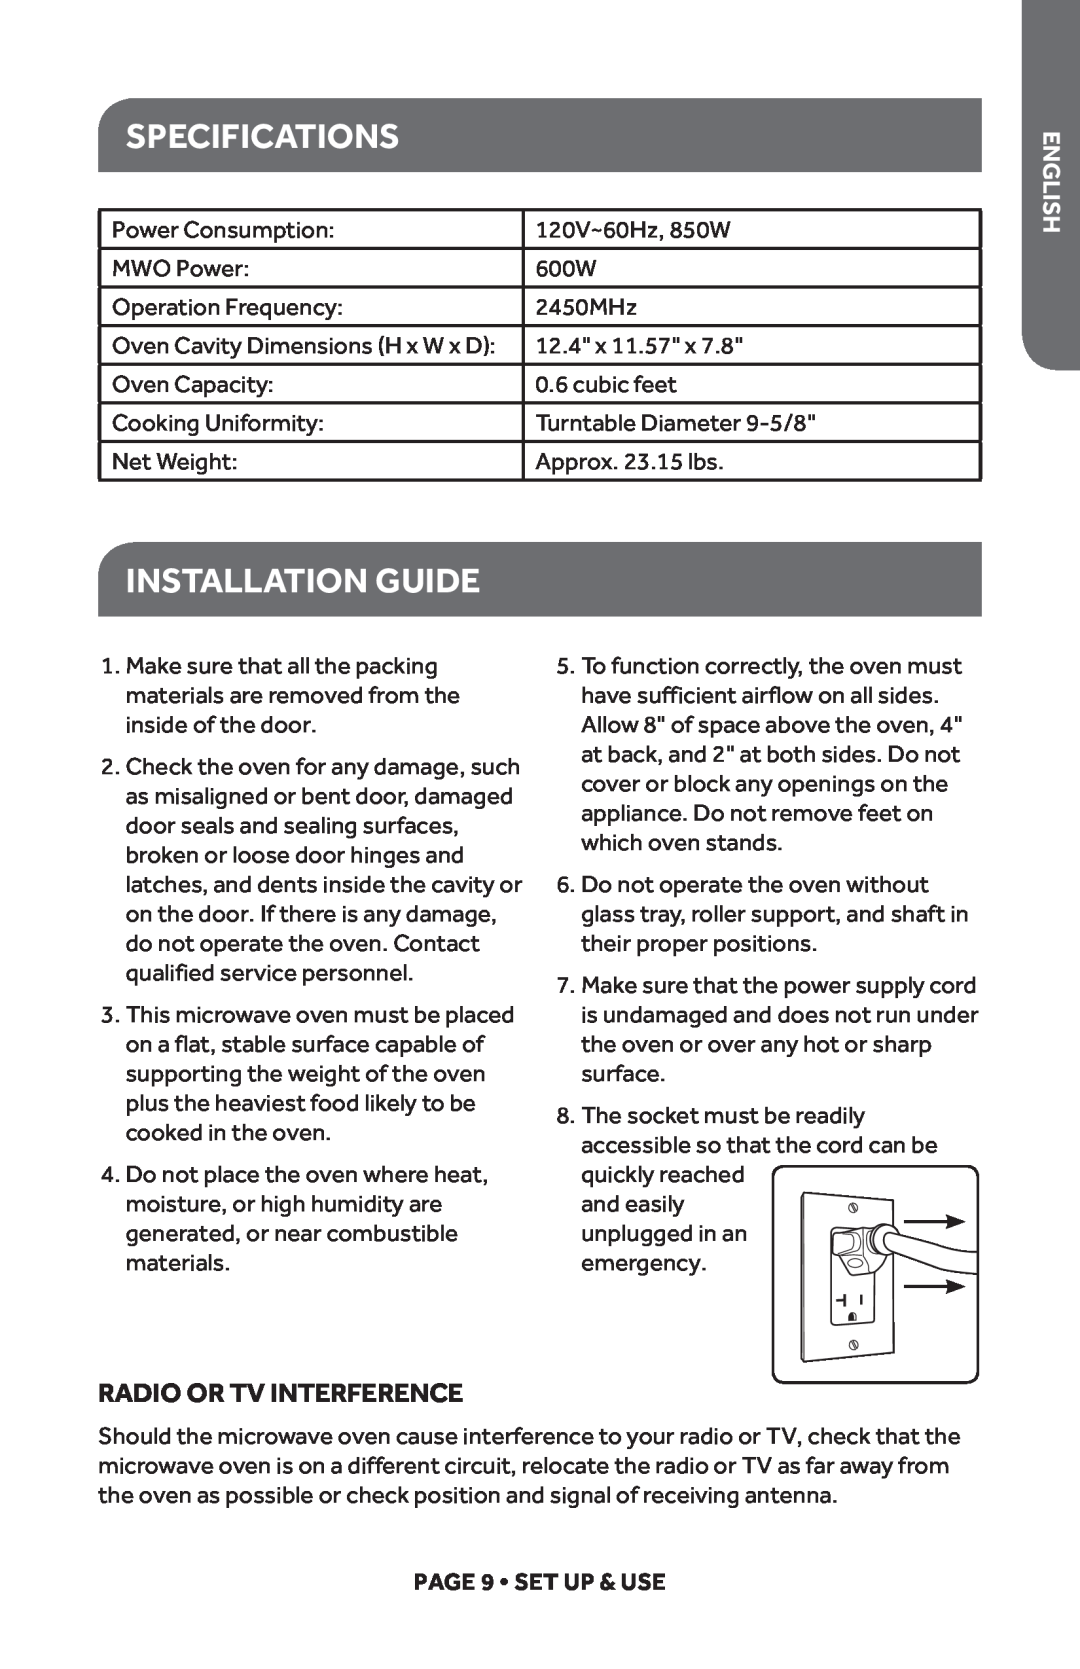 Haier HMC610BEBB, HMC610BEWW Specifications, Installation Guide, Radio Or Tv Interference, English, PAGE 9 SET UP & USE 